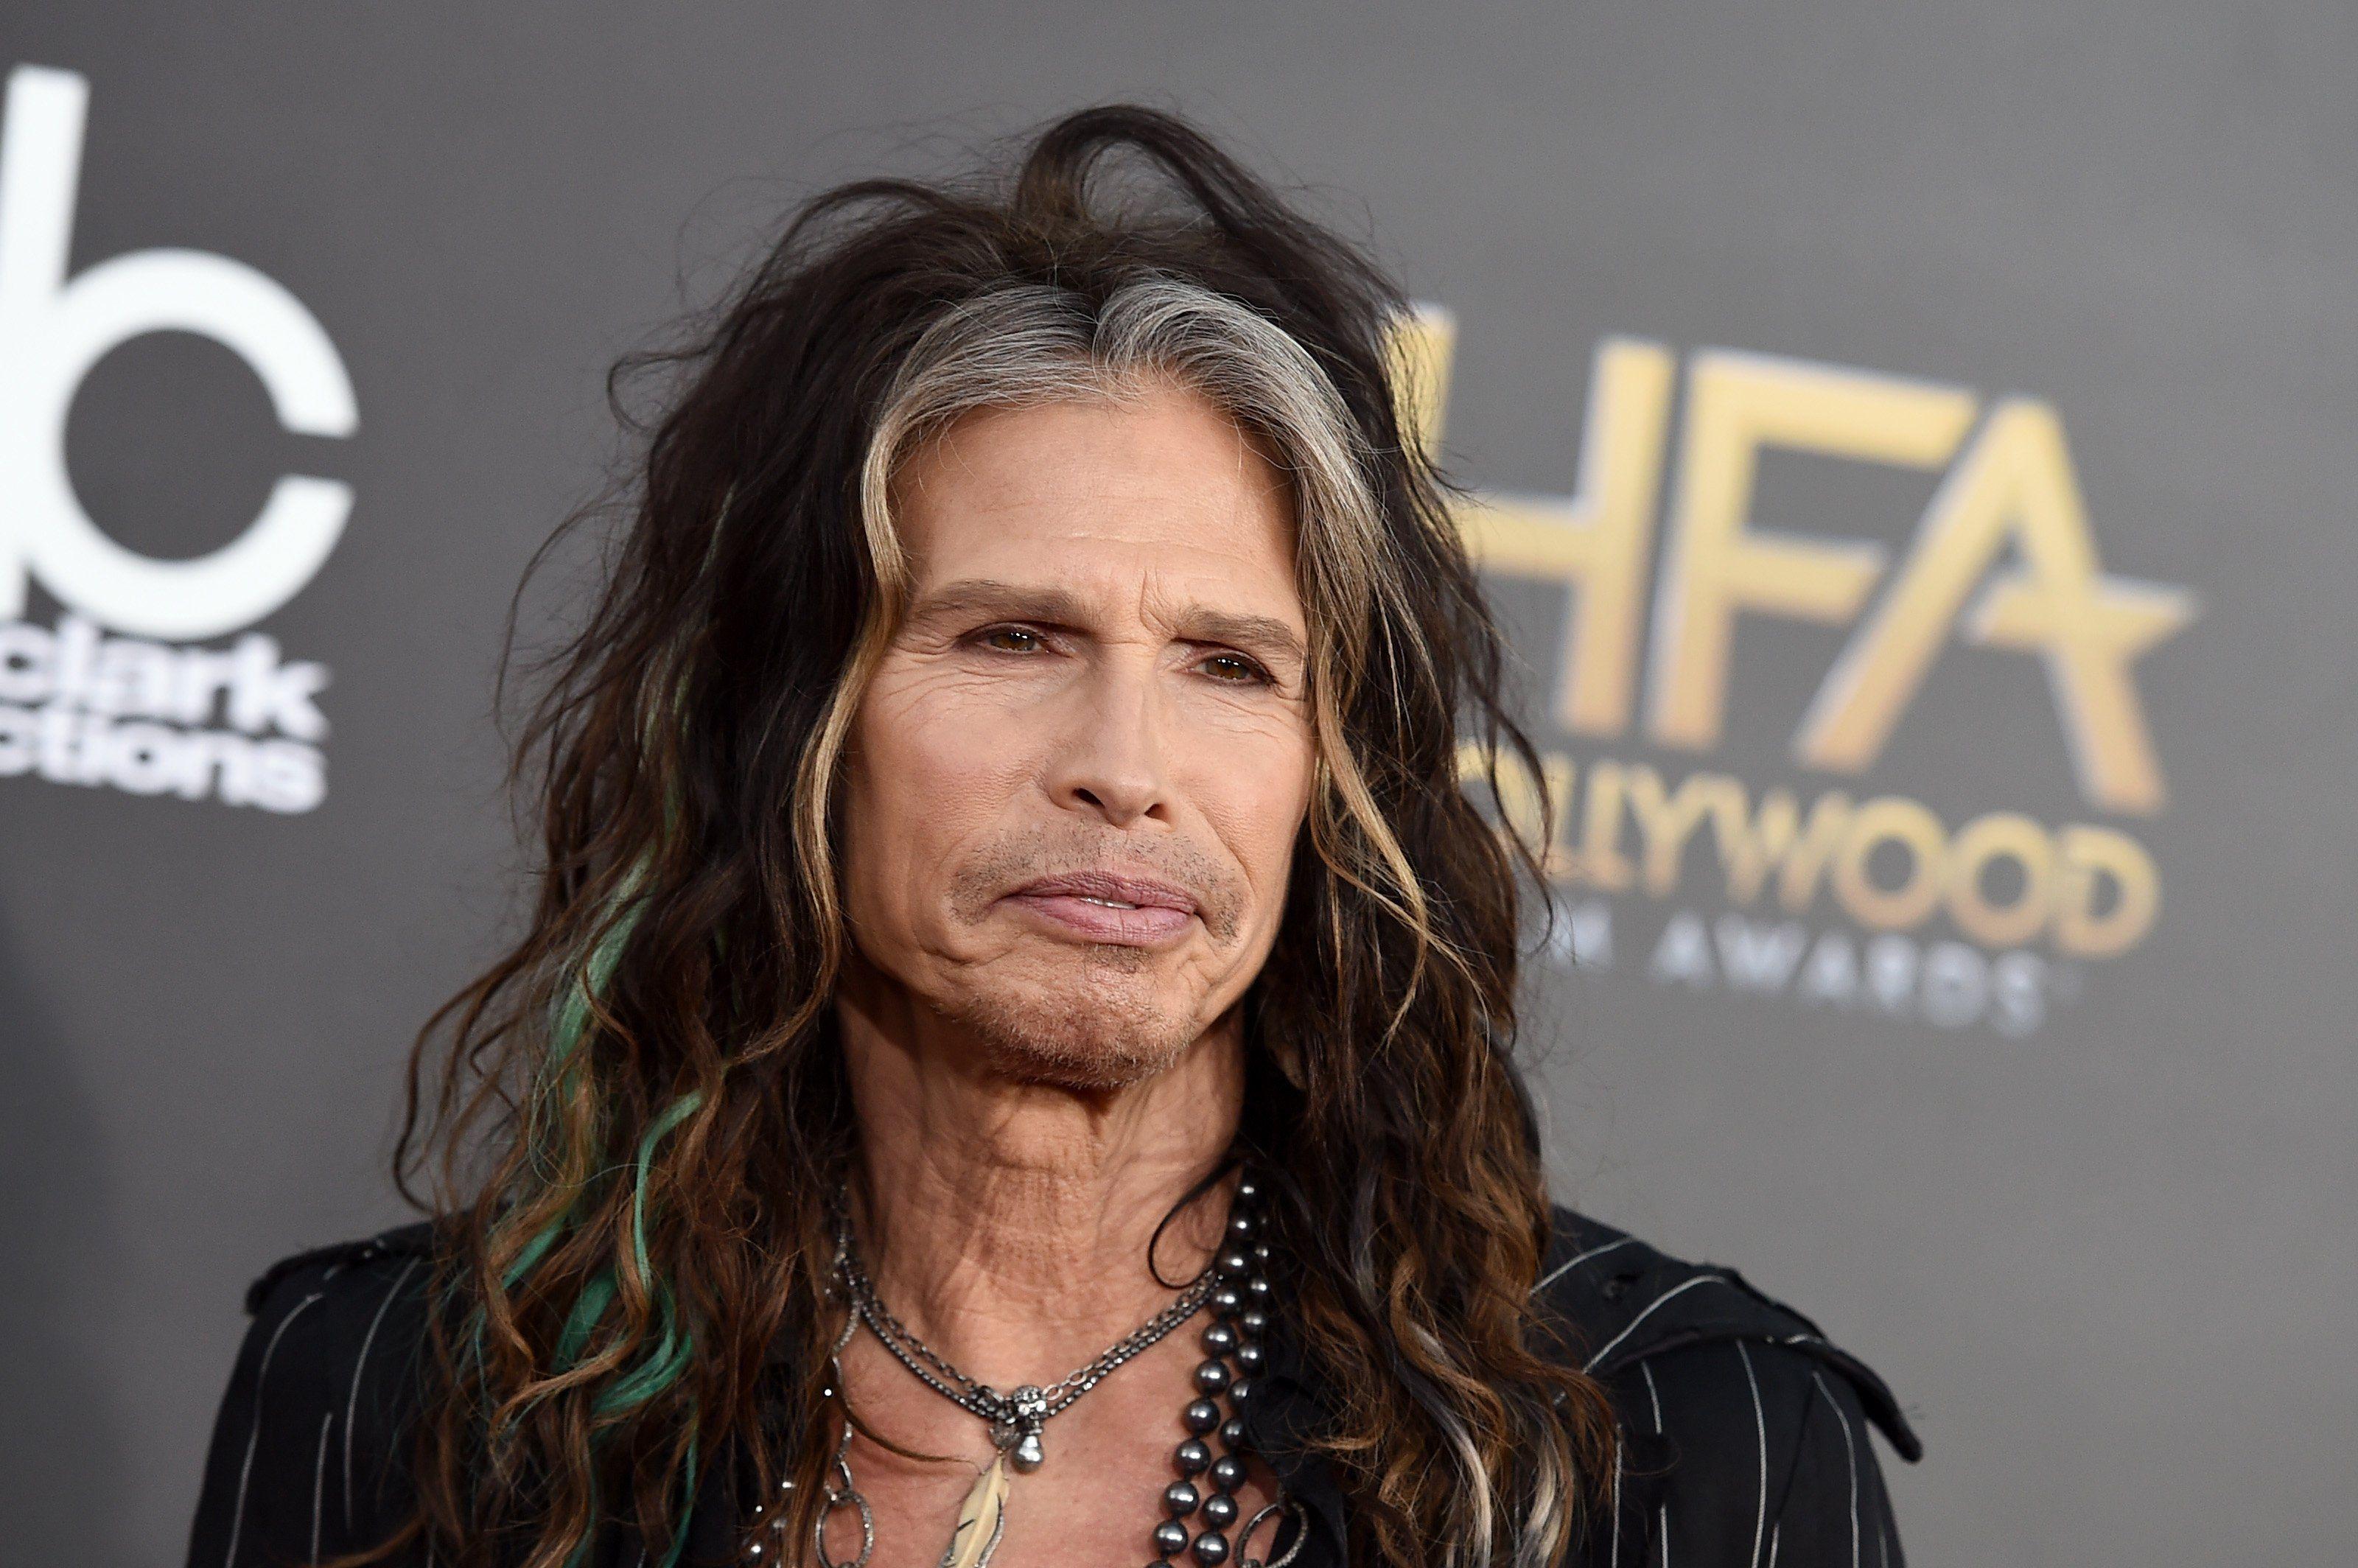 Steven Tyler's Health Issues Force Aerosmith To Cancel Their Tour